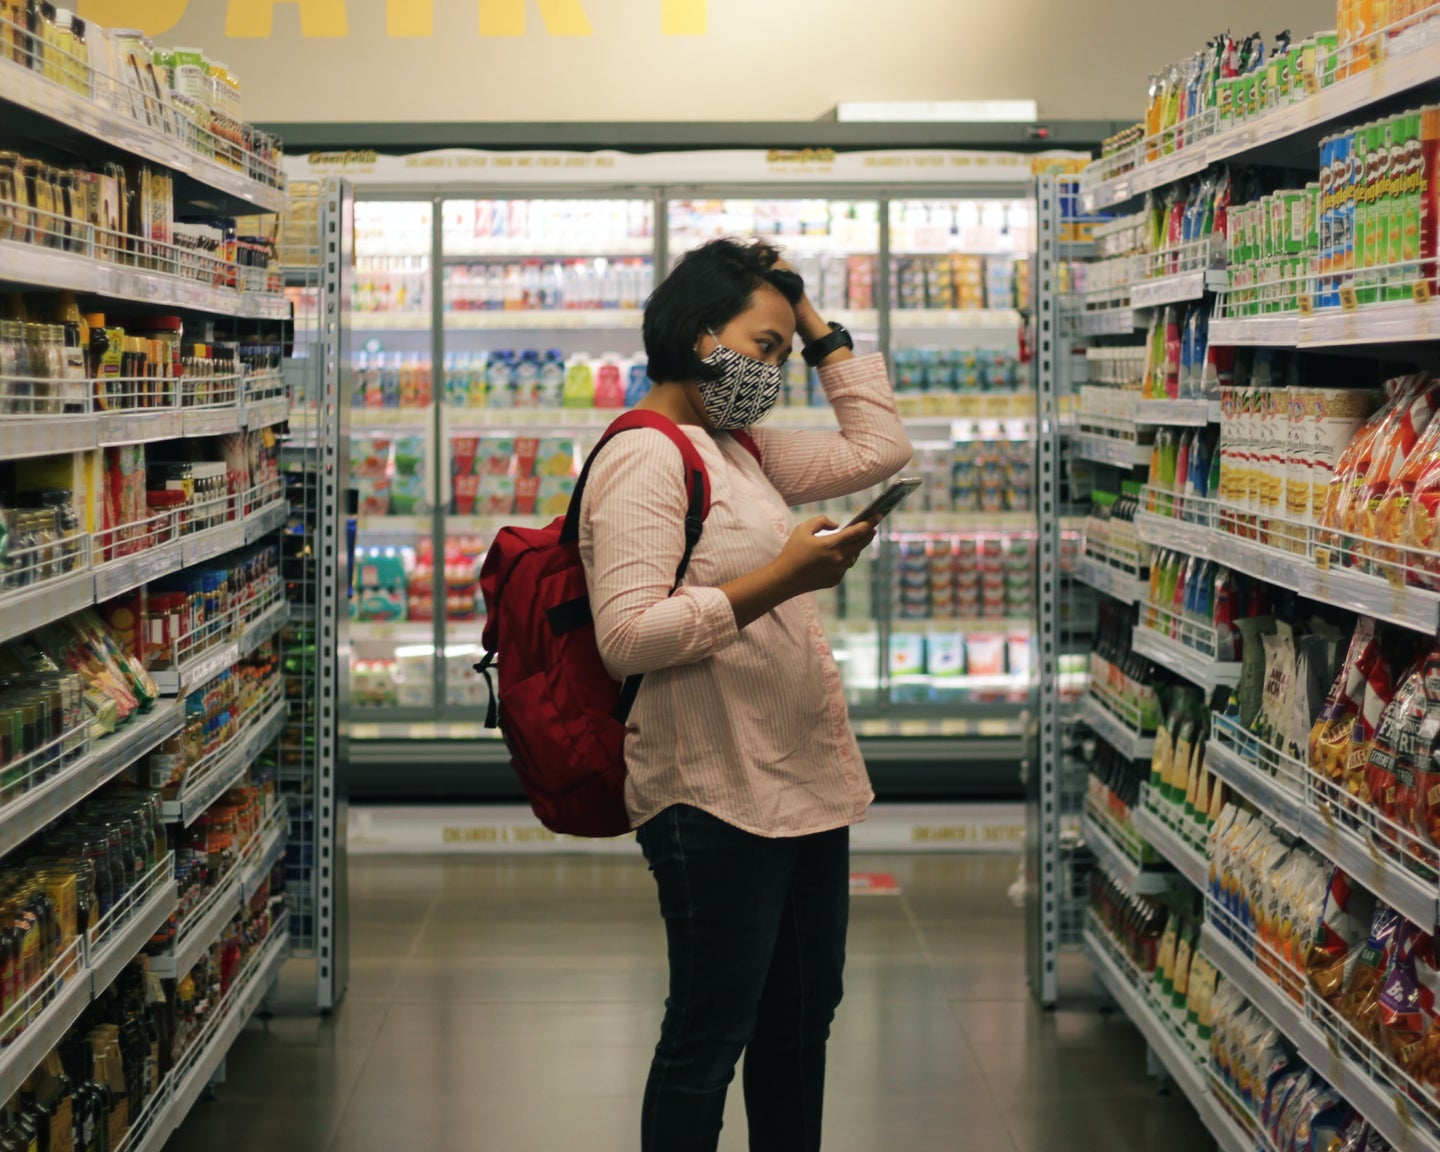 A dark haired person wearing a black and white patterned mask with a red backpack stands in a grocery store aisle, holding up a smartphone in one hand and running their other hand through their hair. They are looking intently at an array of colorful packaged foods.